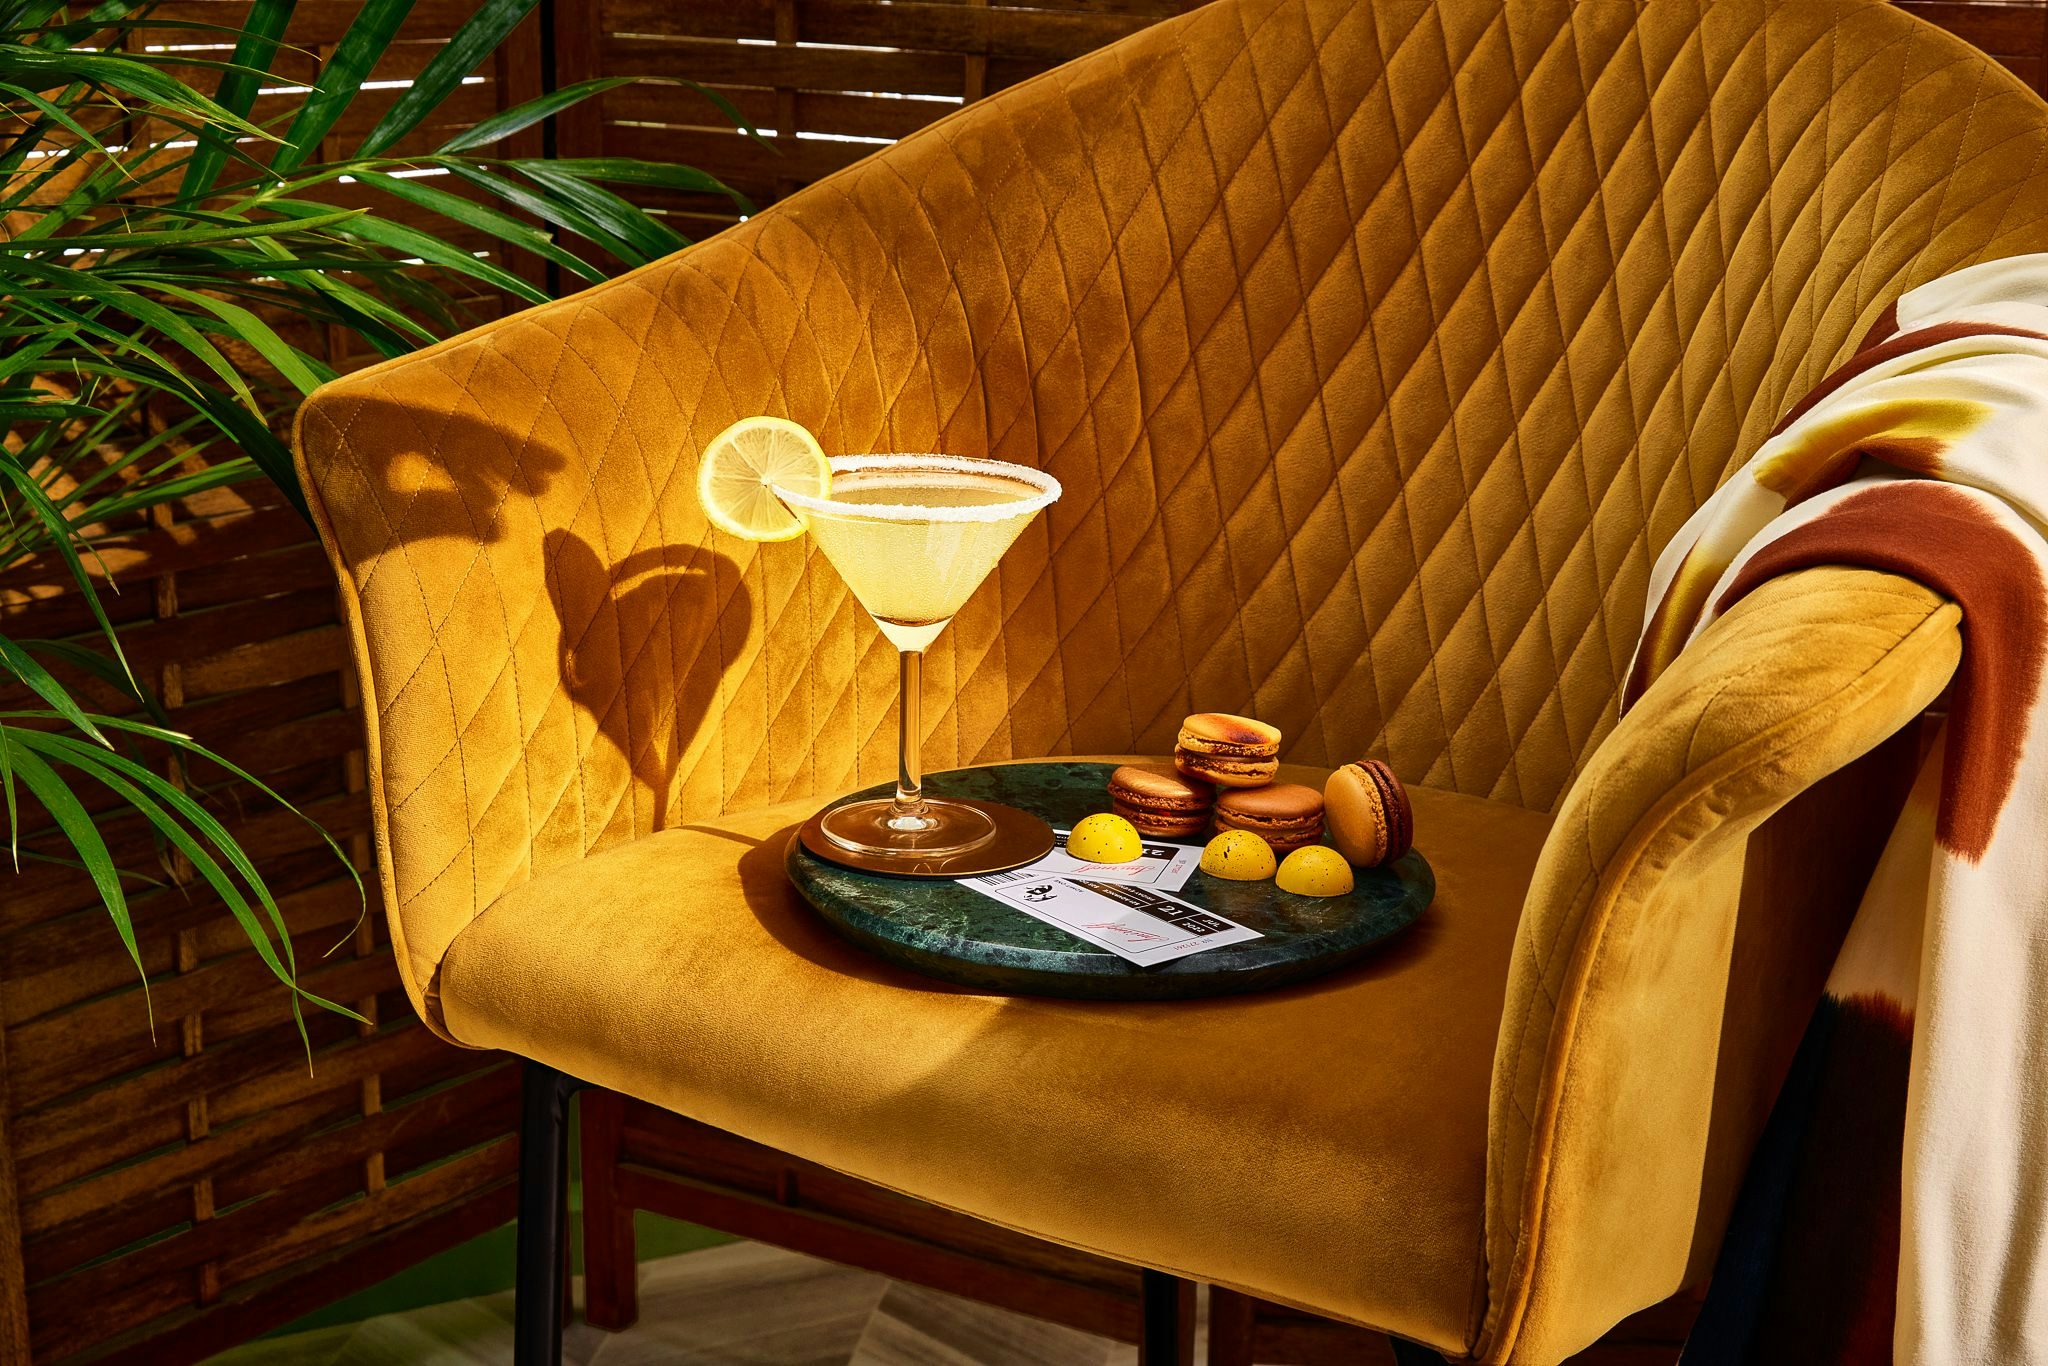 A cocktail on a tray with fruits, placed on an armchair.